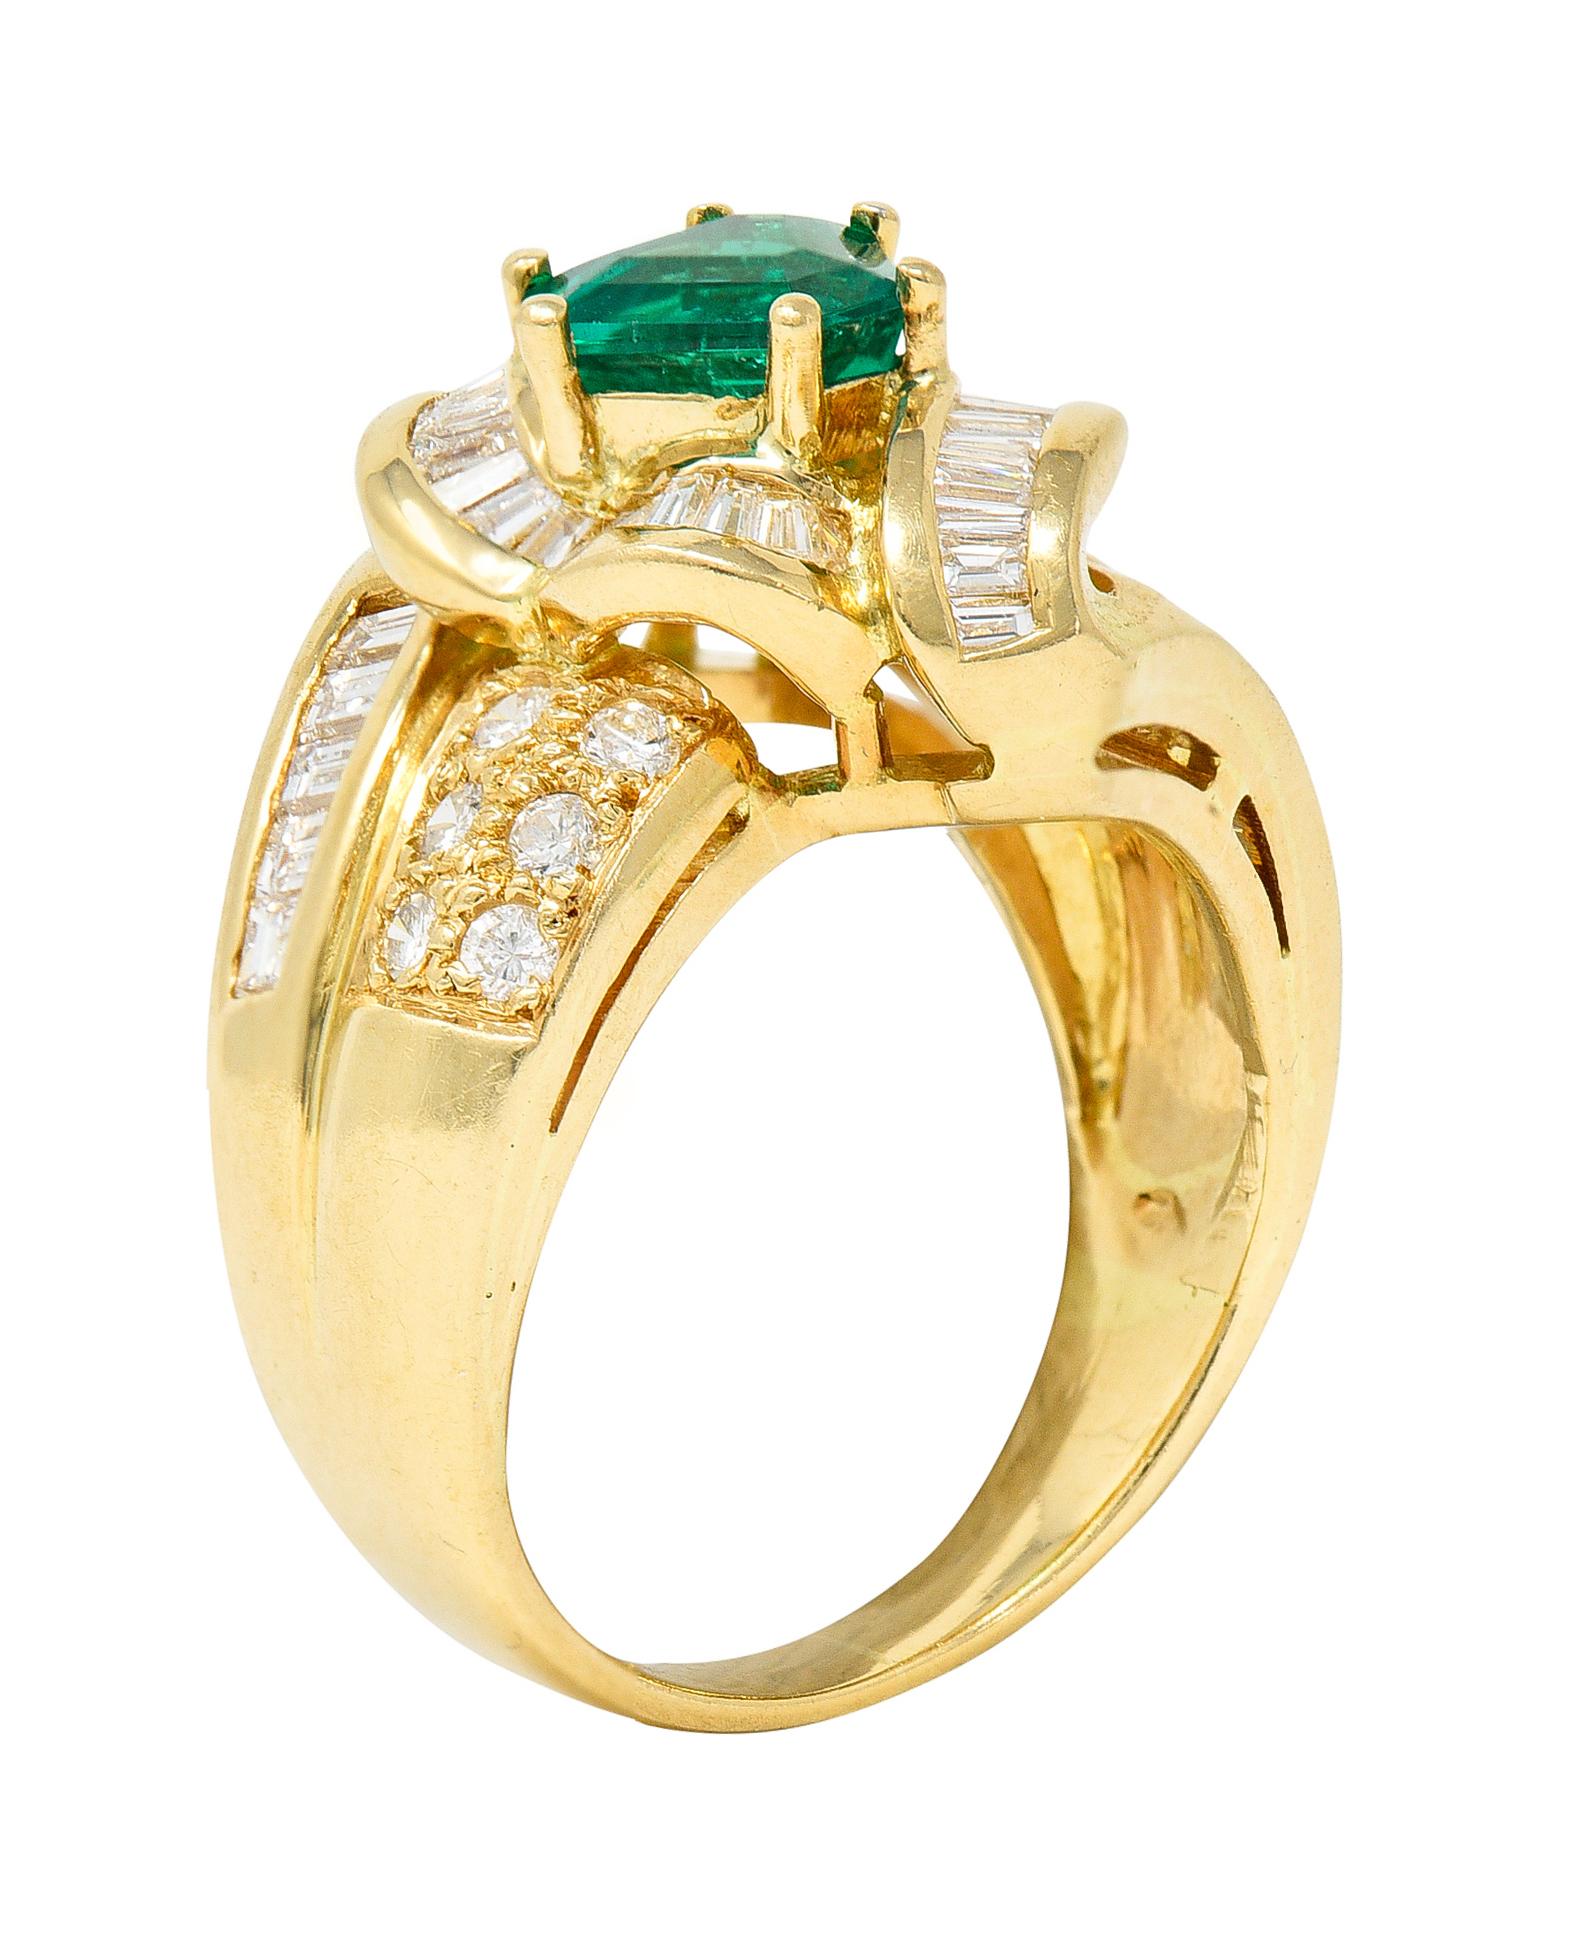 Bypass style ring is designed as a knot motif with a ribbon-like channel wrapping throughout

Featuring a hexagonal cut Colombian emerald weighing approximately 0.84 carat

Vividly green in color and semi-transparent with natural inclusions - minor